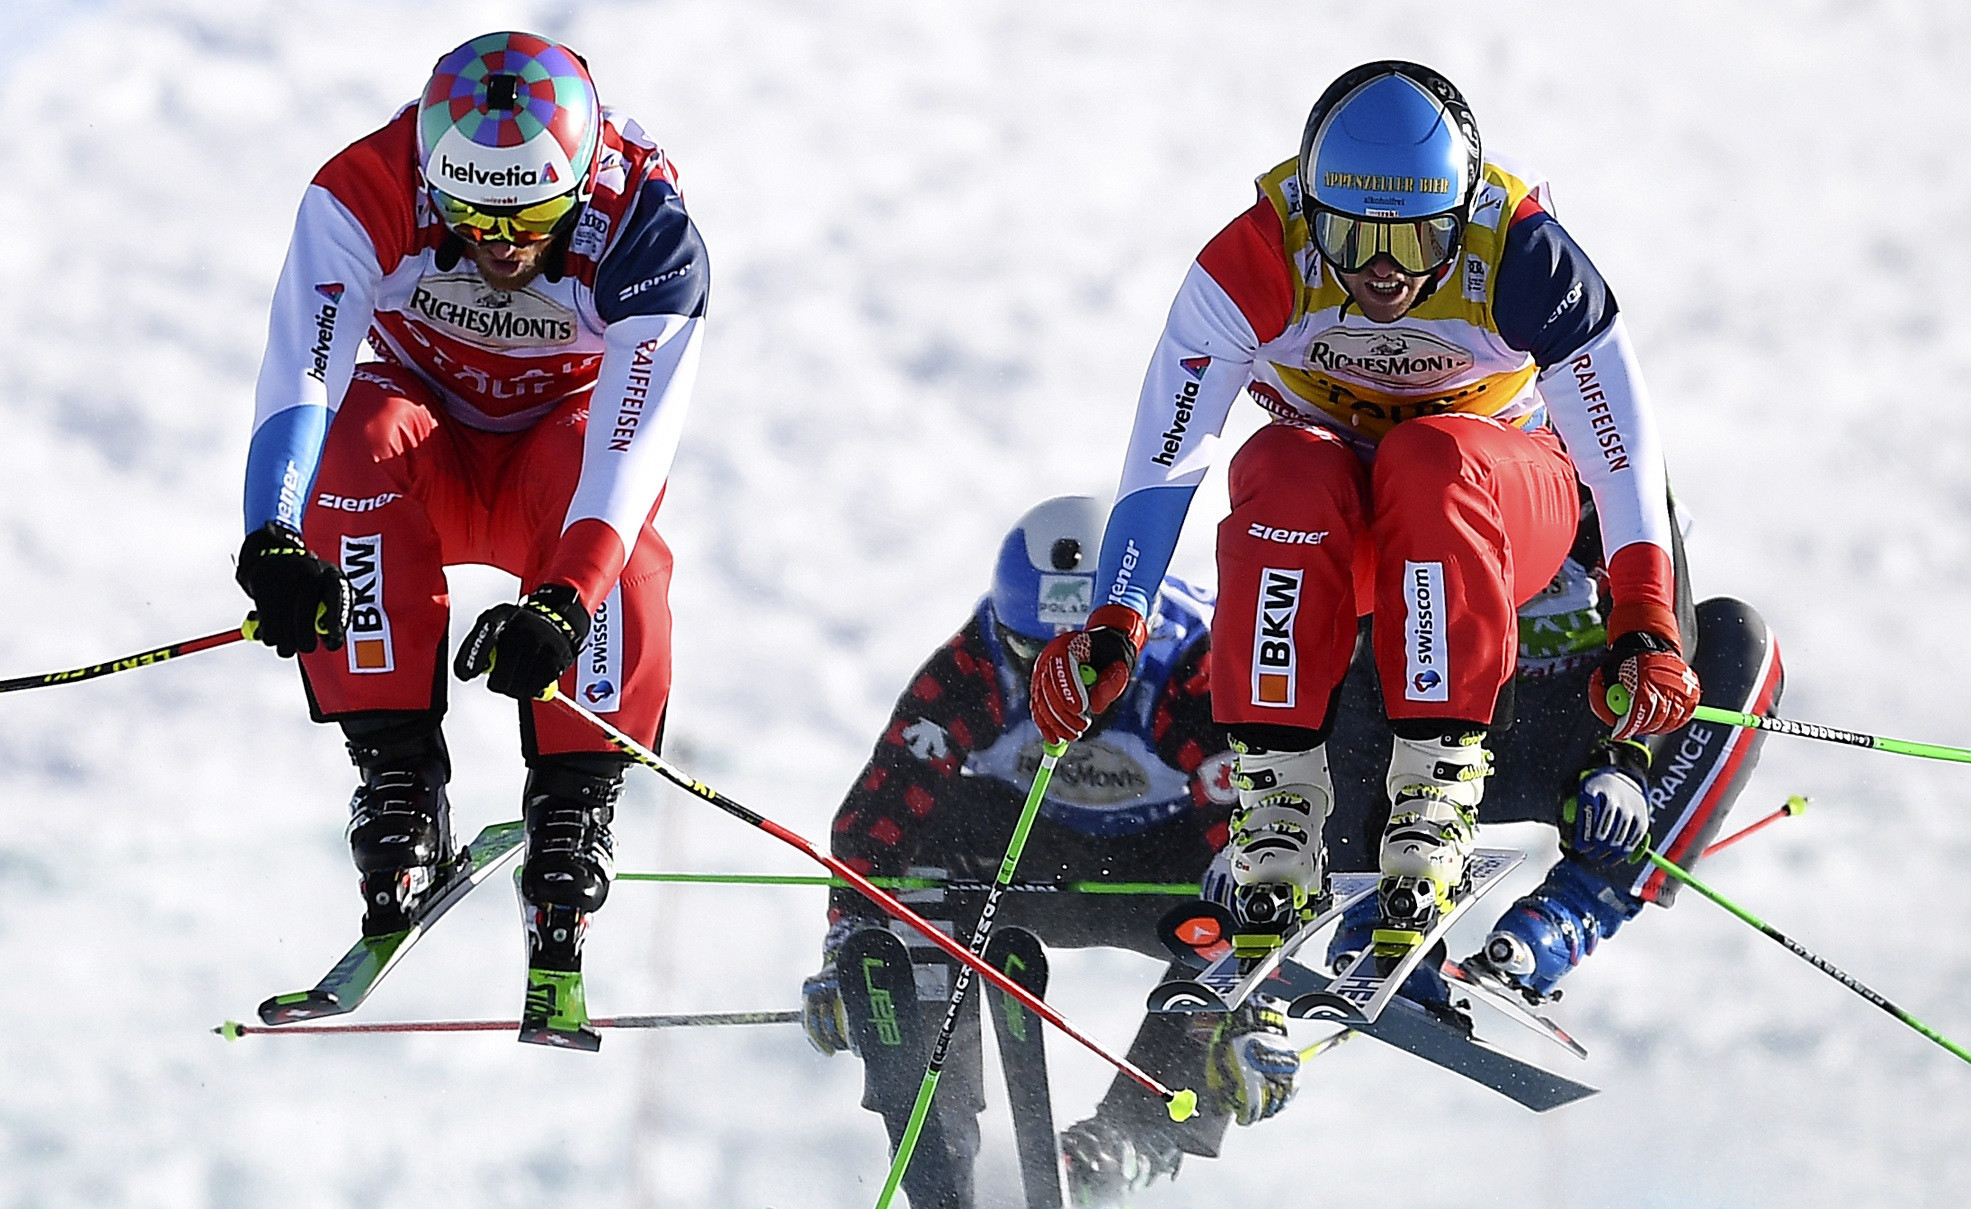 Bischofberger makes it back-to-back wins at FIS Ski Cross World Cup in Innichen